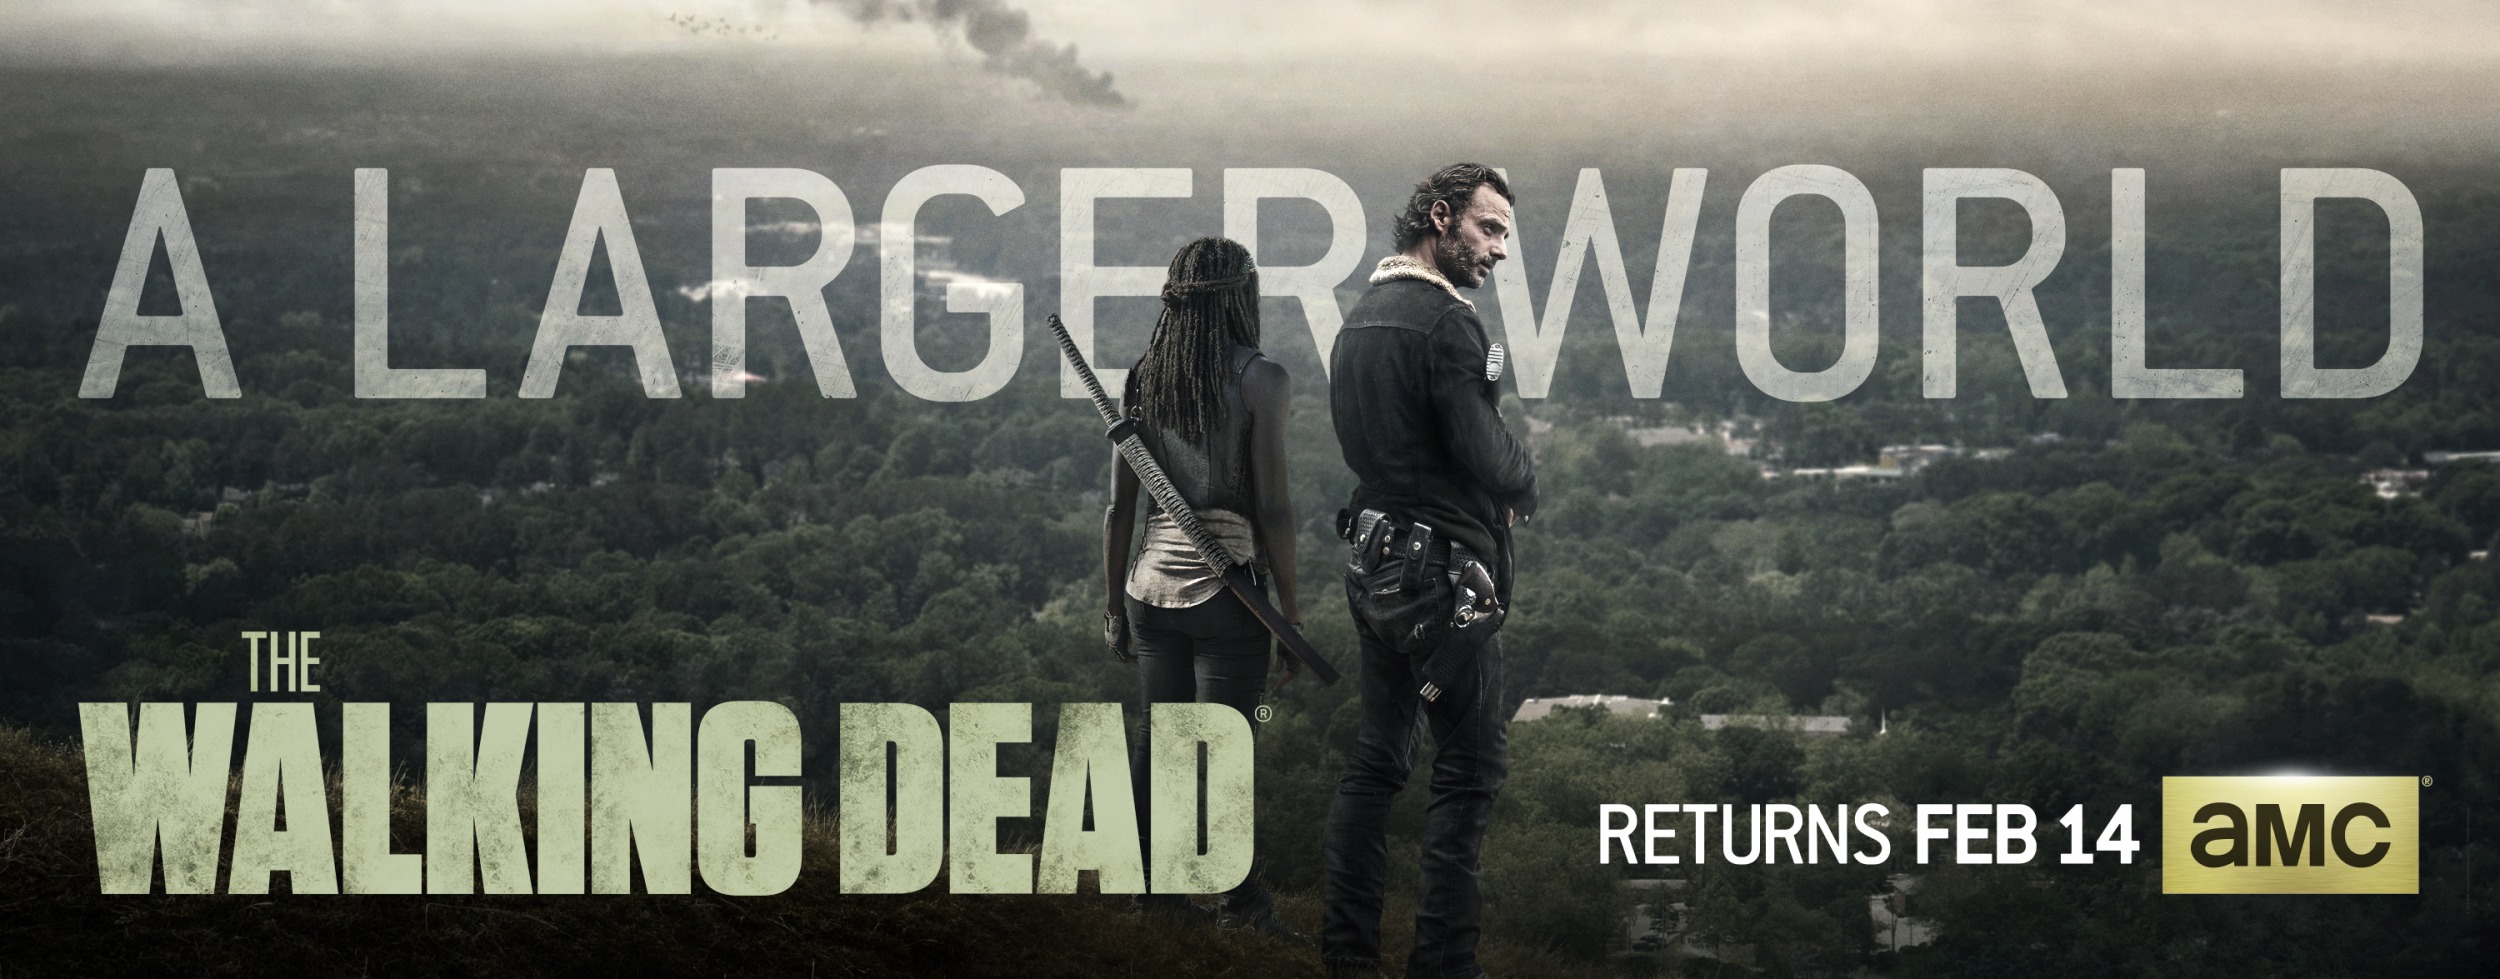 Mega Sized TV Poster Image for The Walking Dead (#44 of 67)